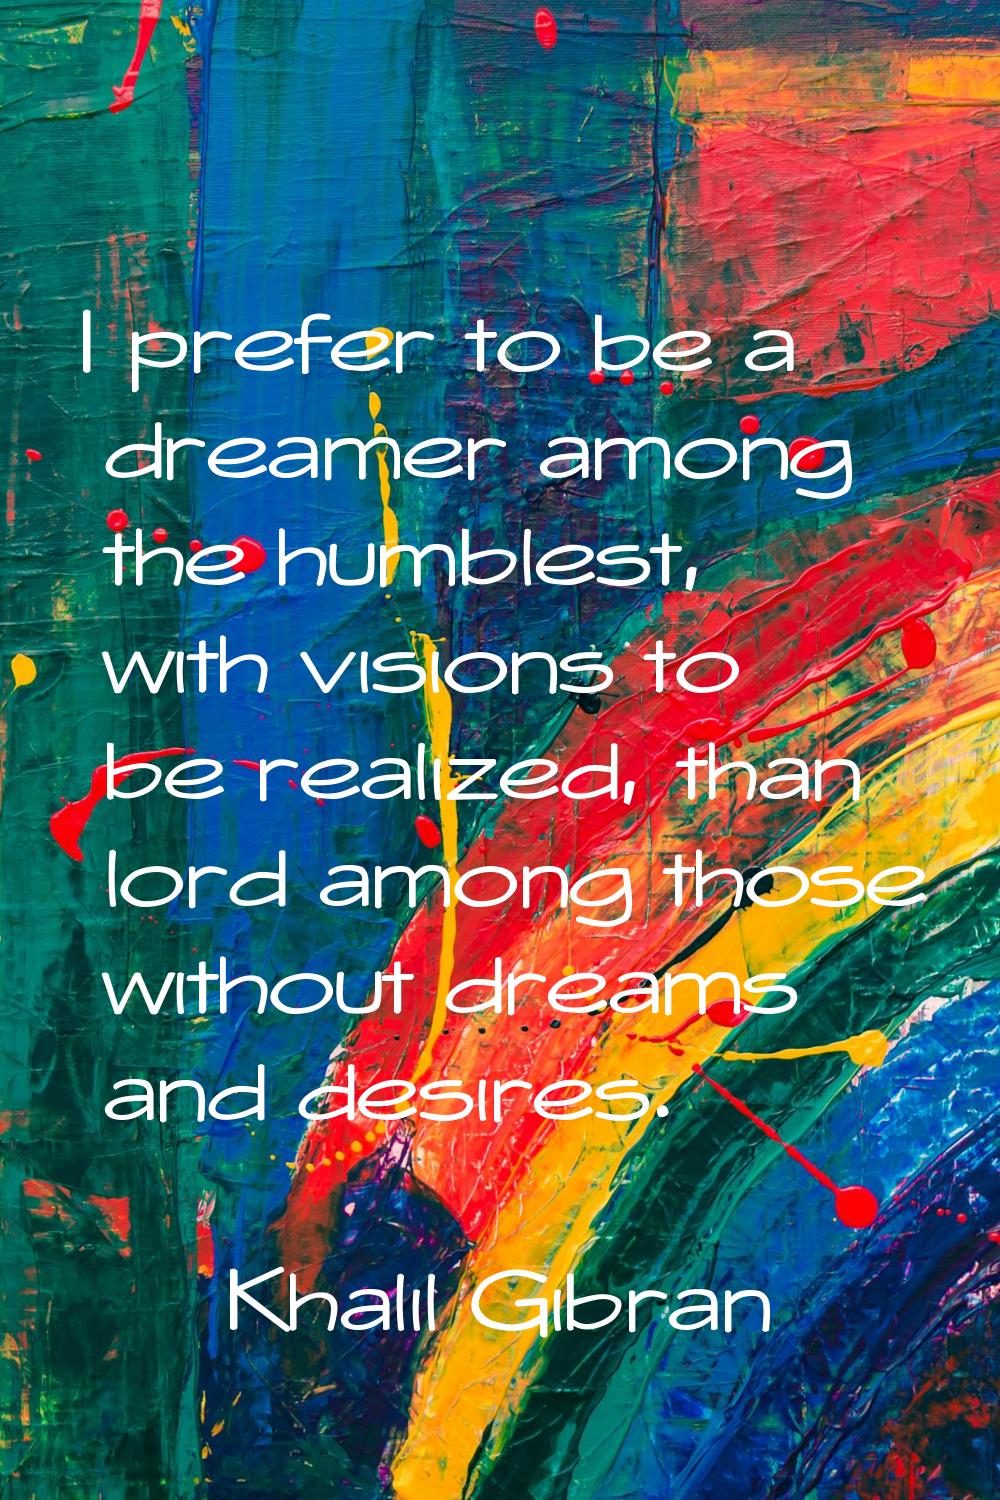 I prefer to be a dreamer among the humblest, with visions to be realized, than lord among those wit